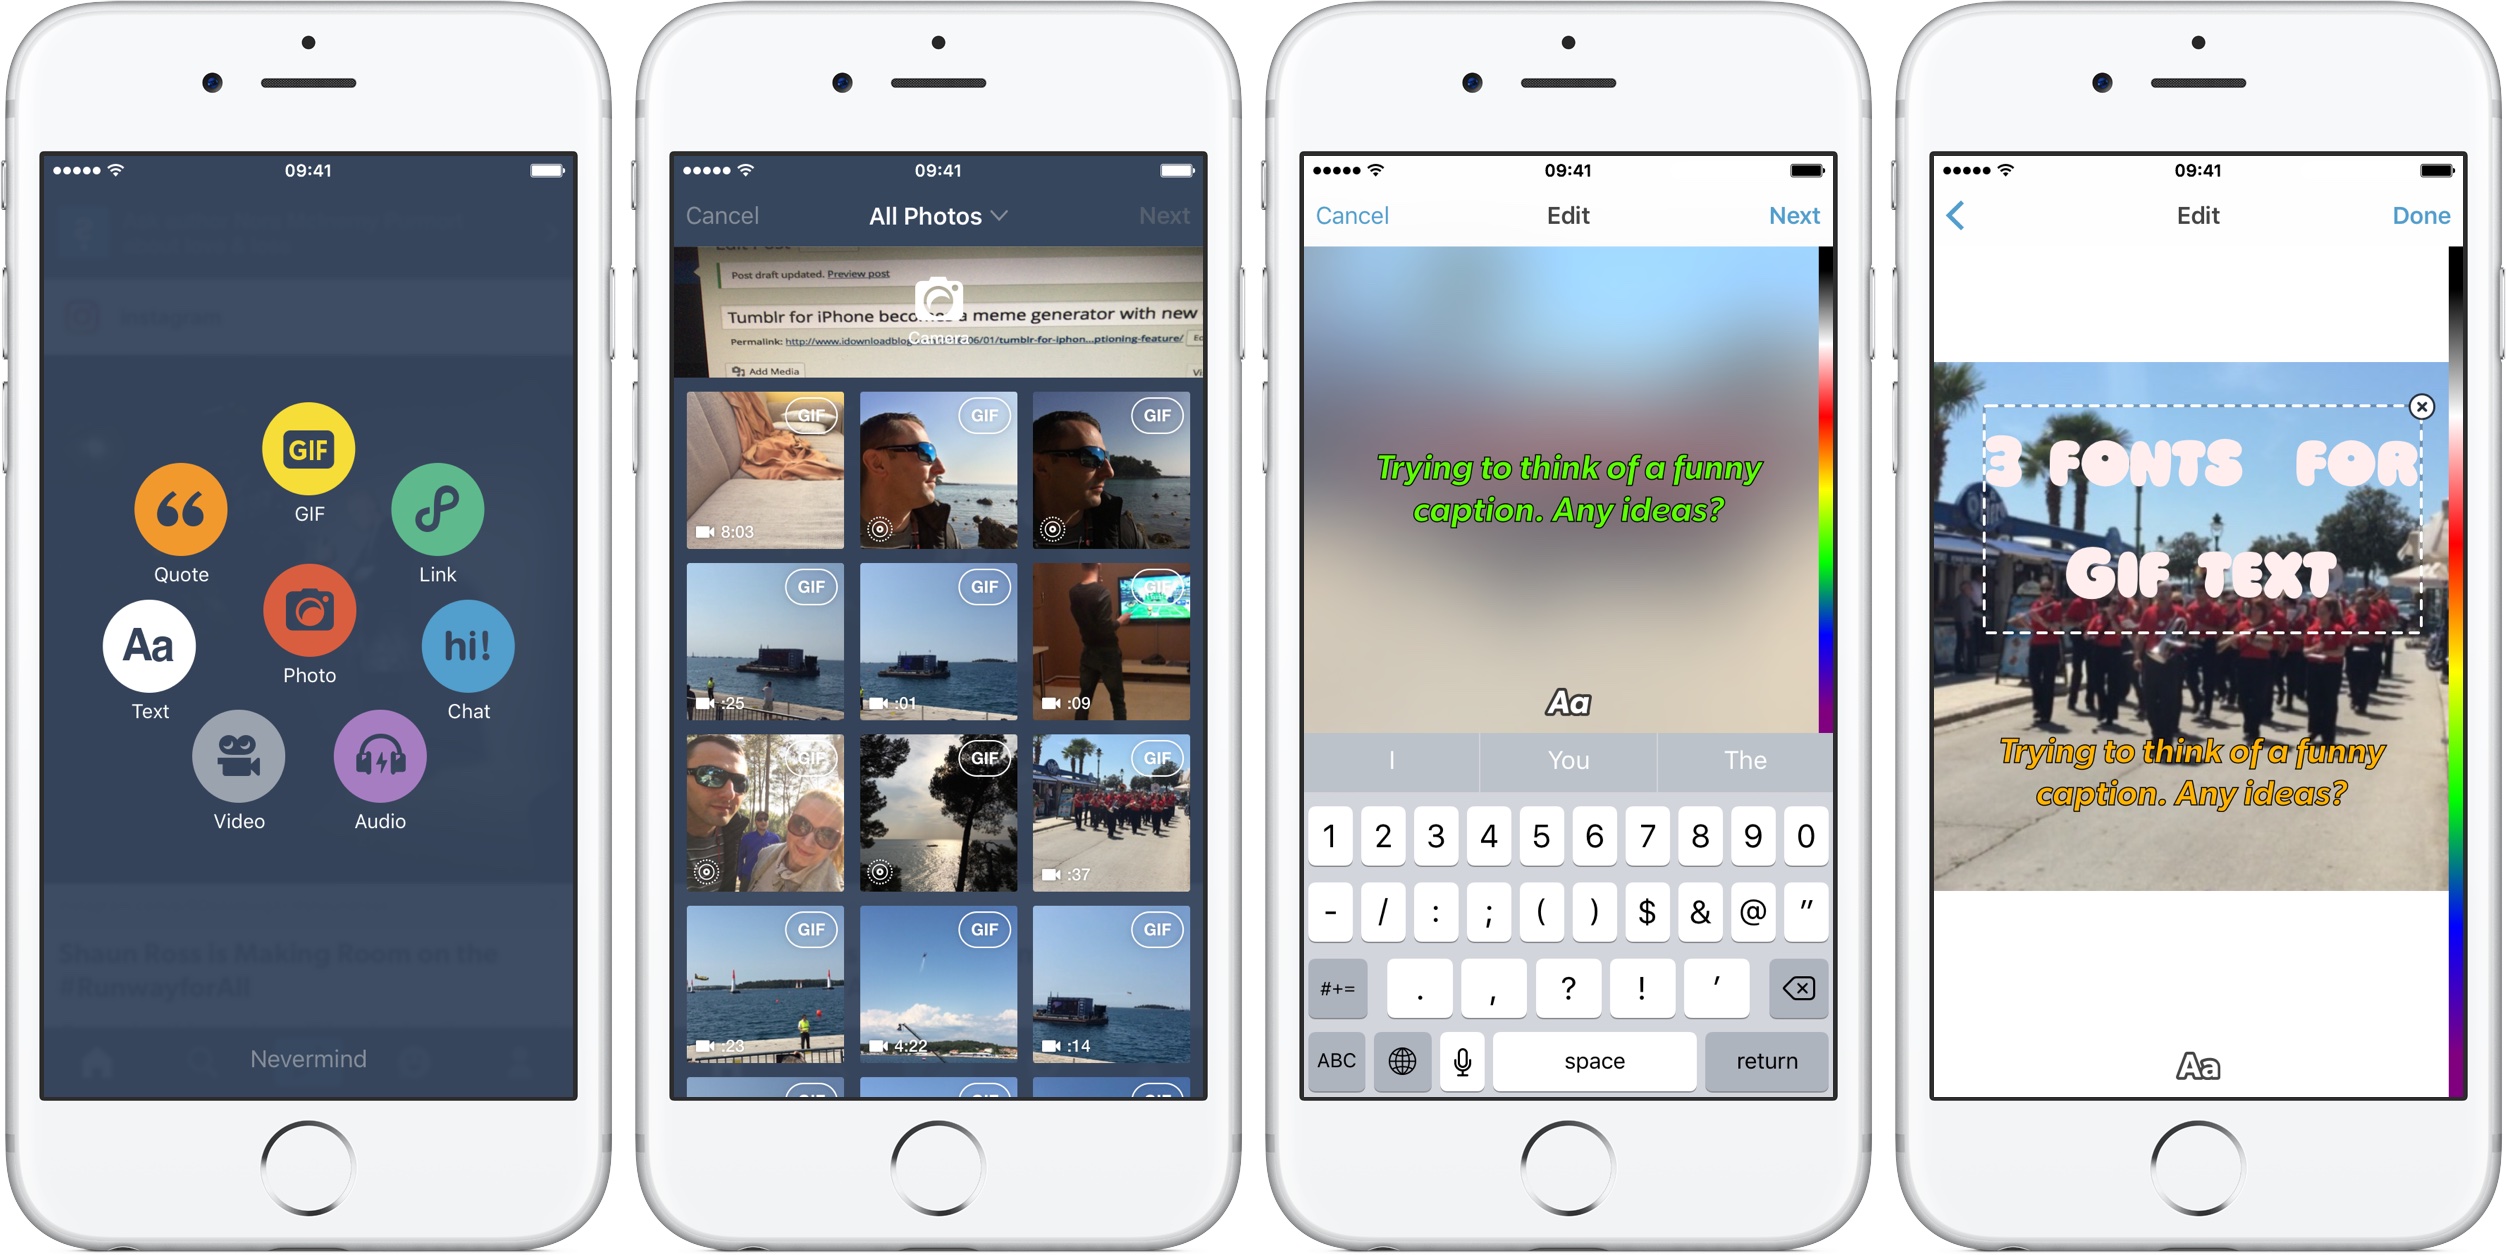 Tumblr for iPhone becomes a meme generator with a new GIF captioning feature